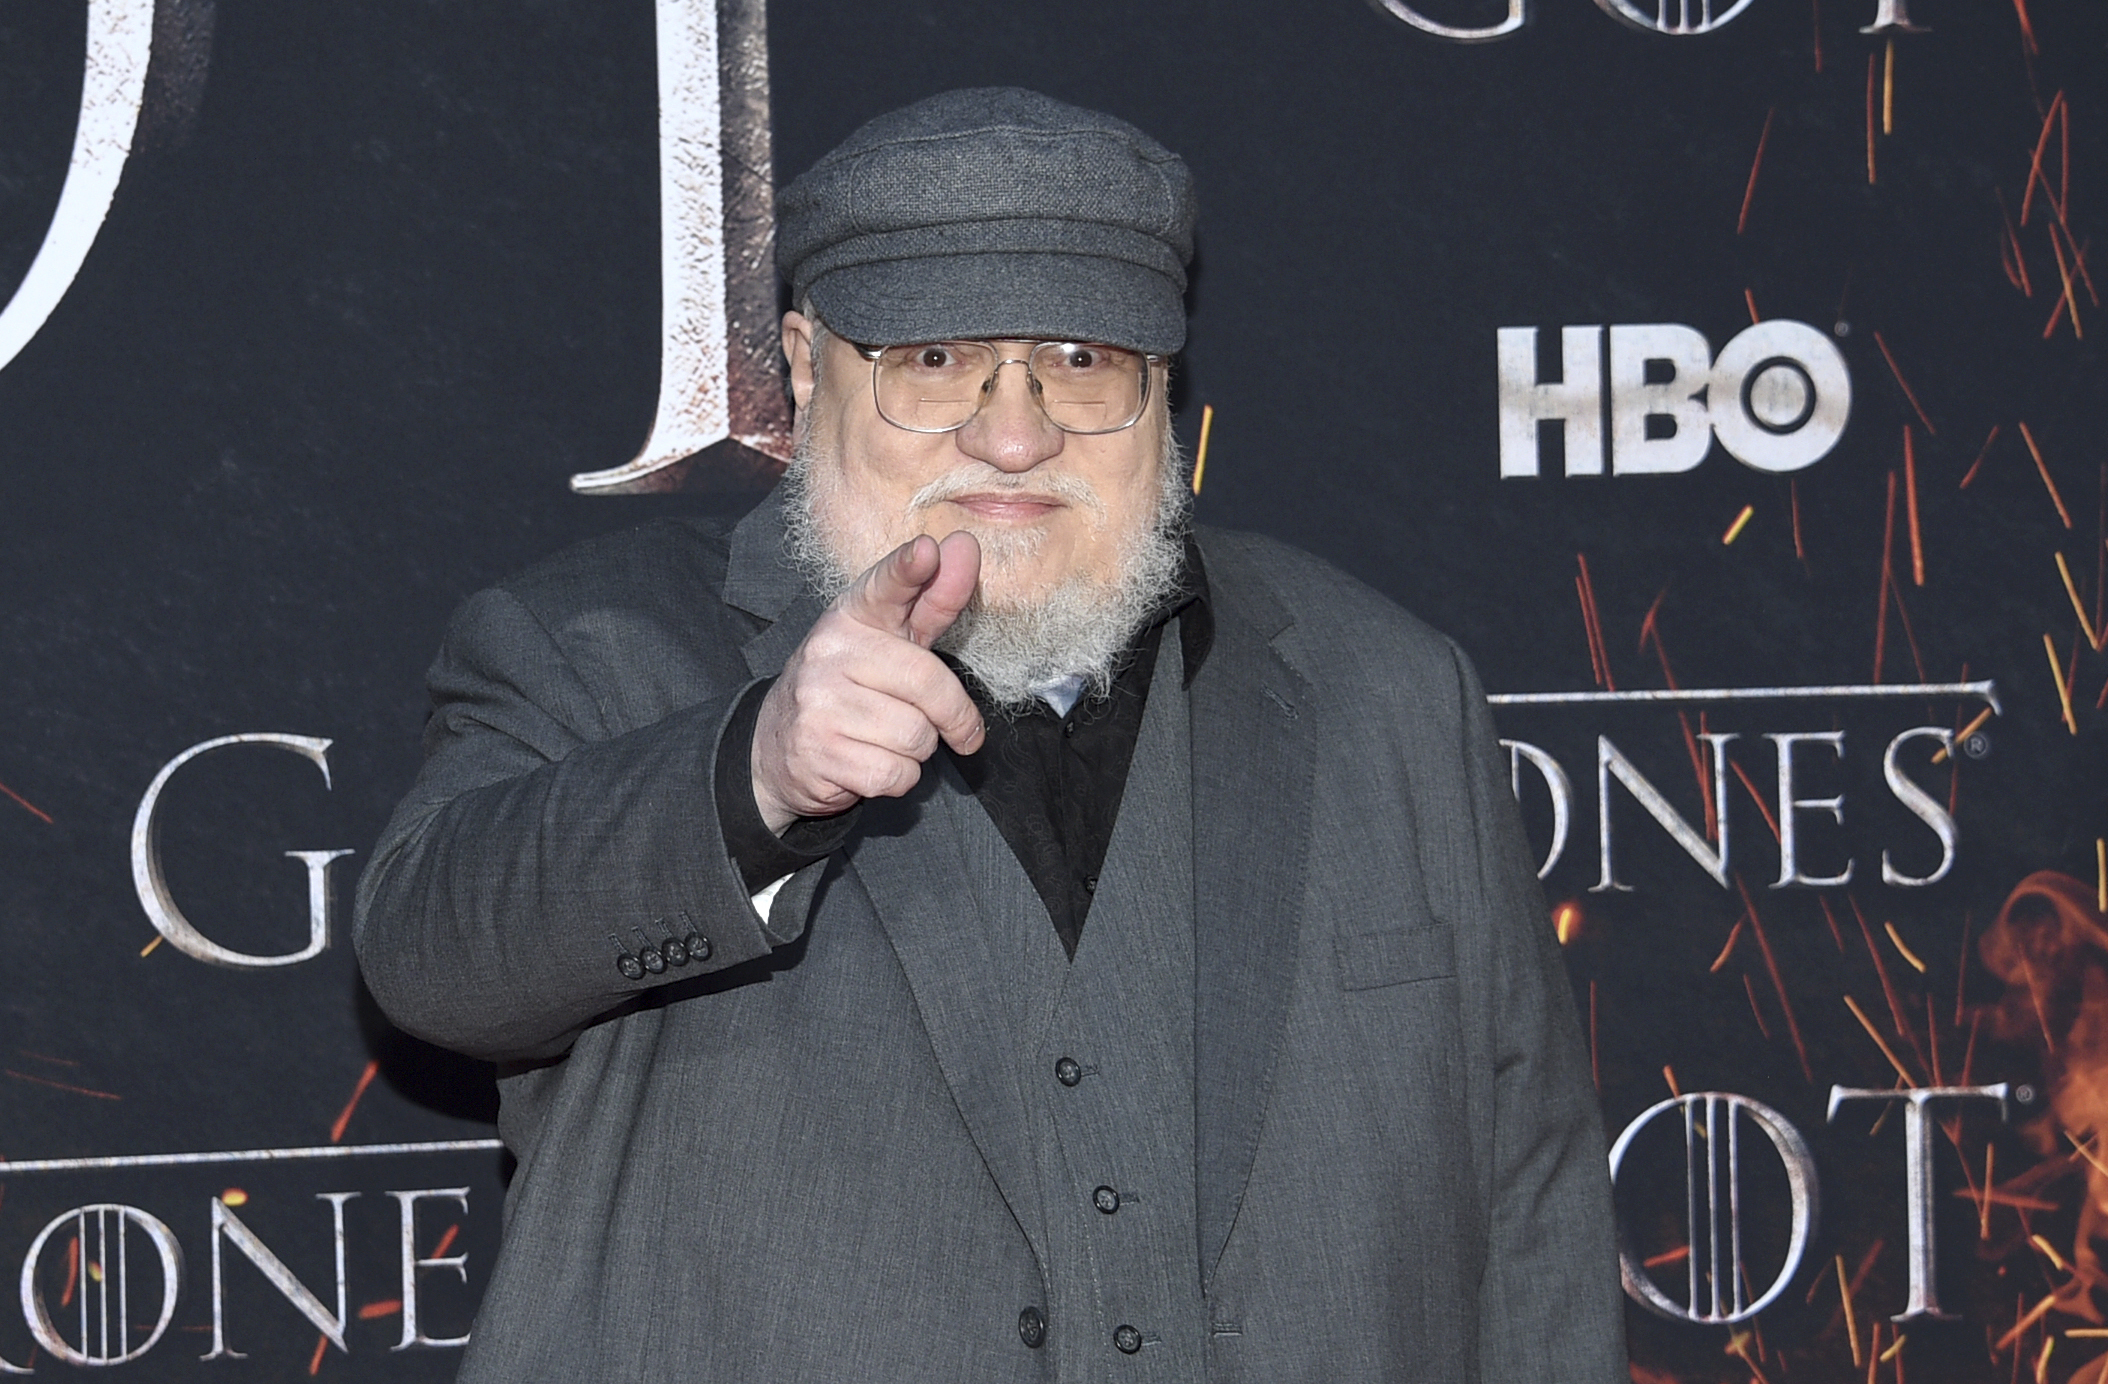 GRRM to Delay Winds of Winter for Other Projects